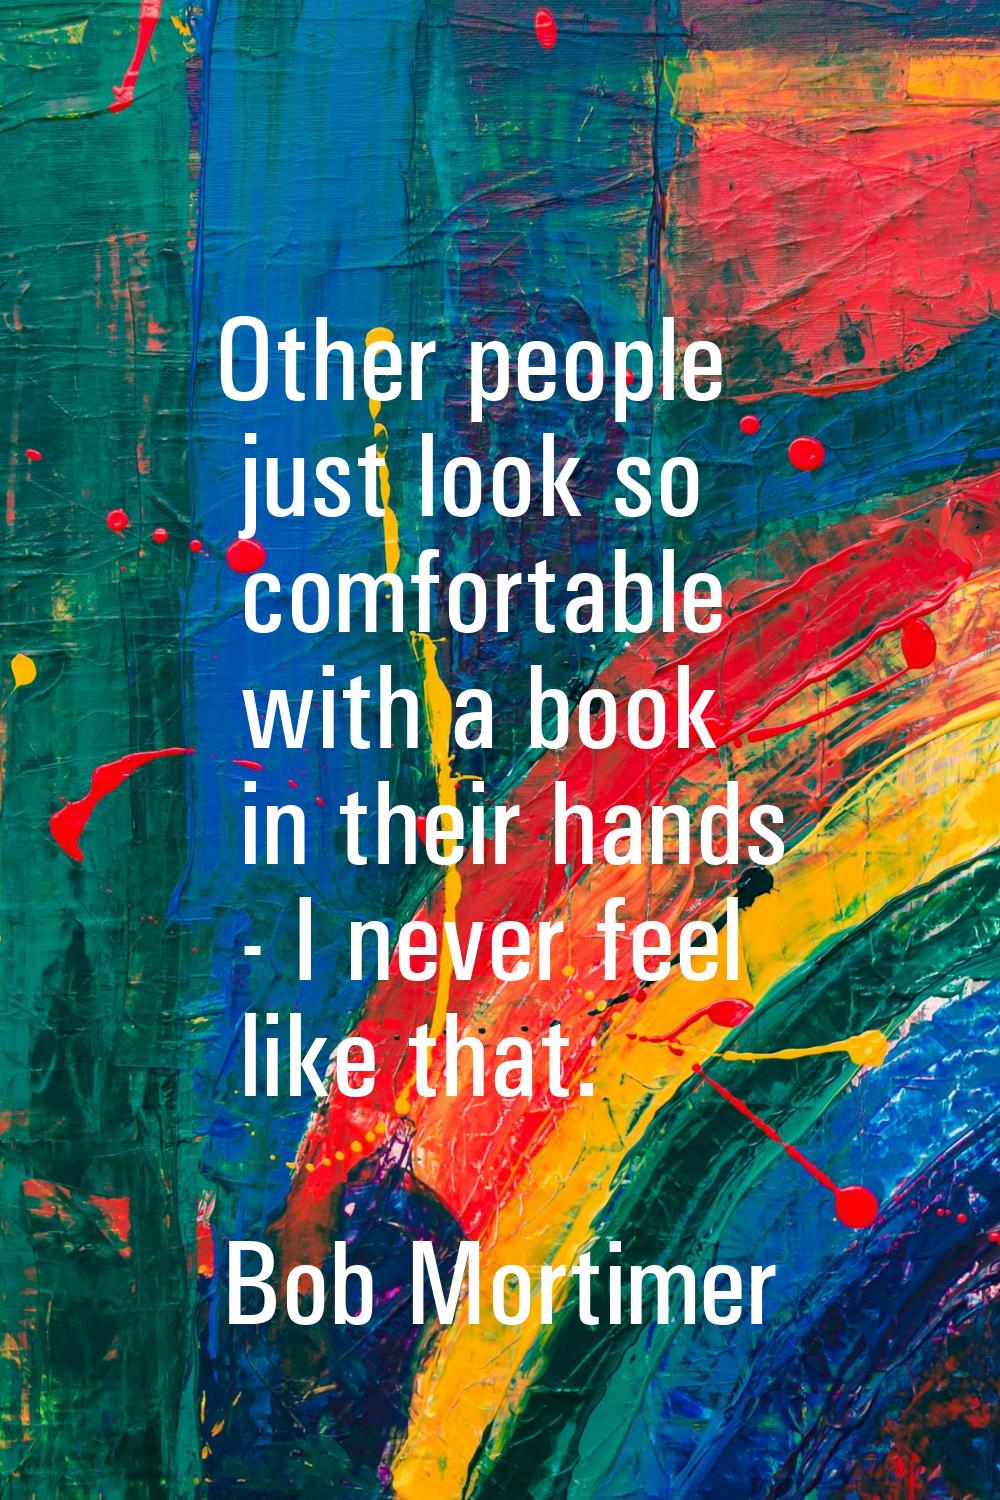 Other people just look so comfortable with a book in their hands - I never feel like that.